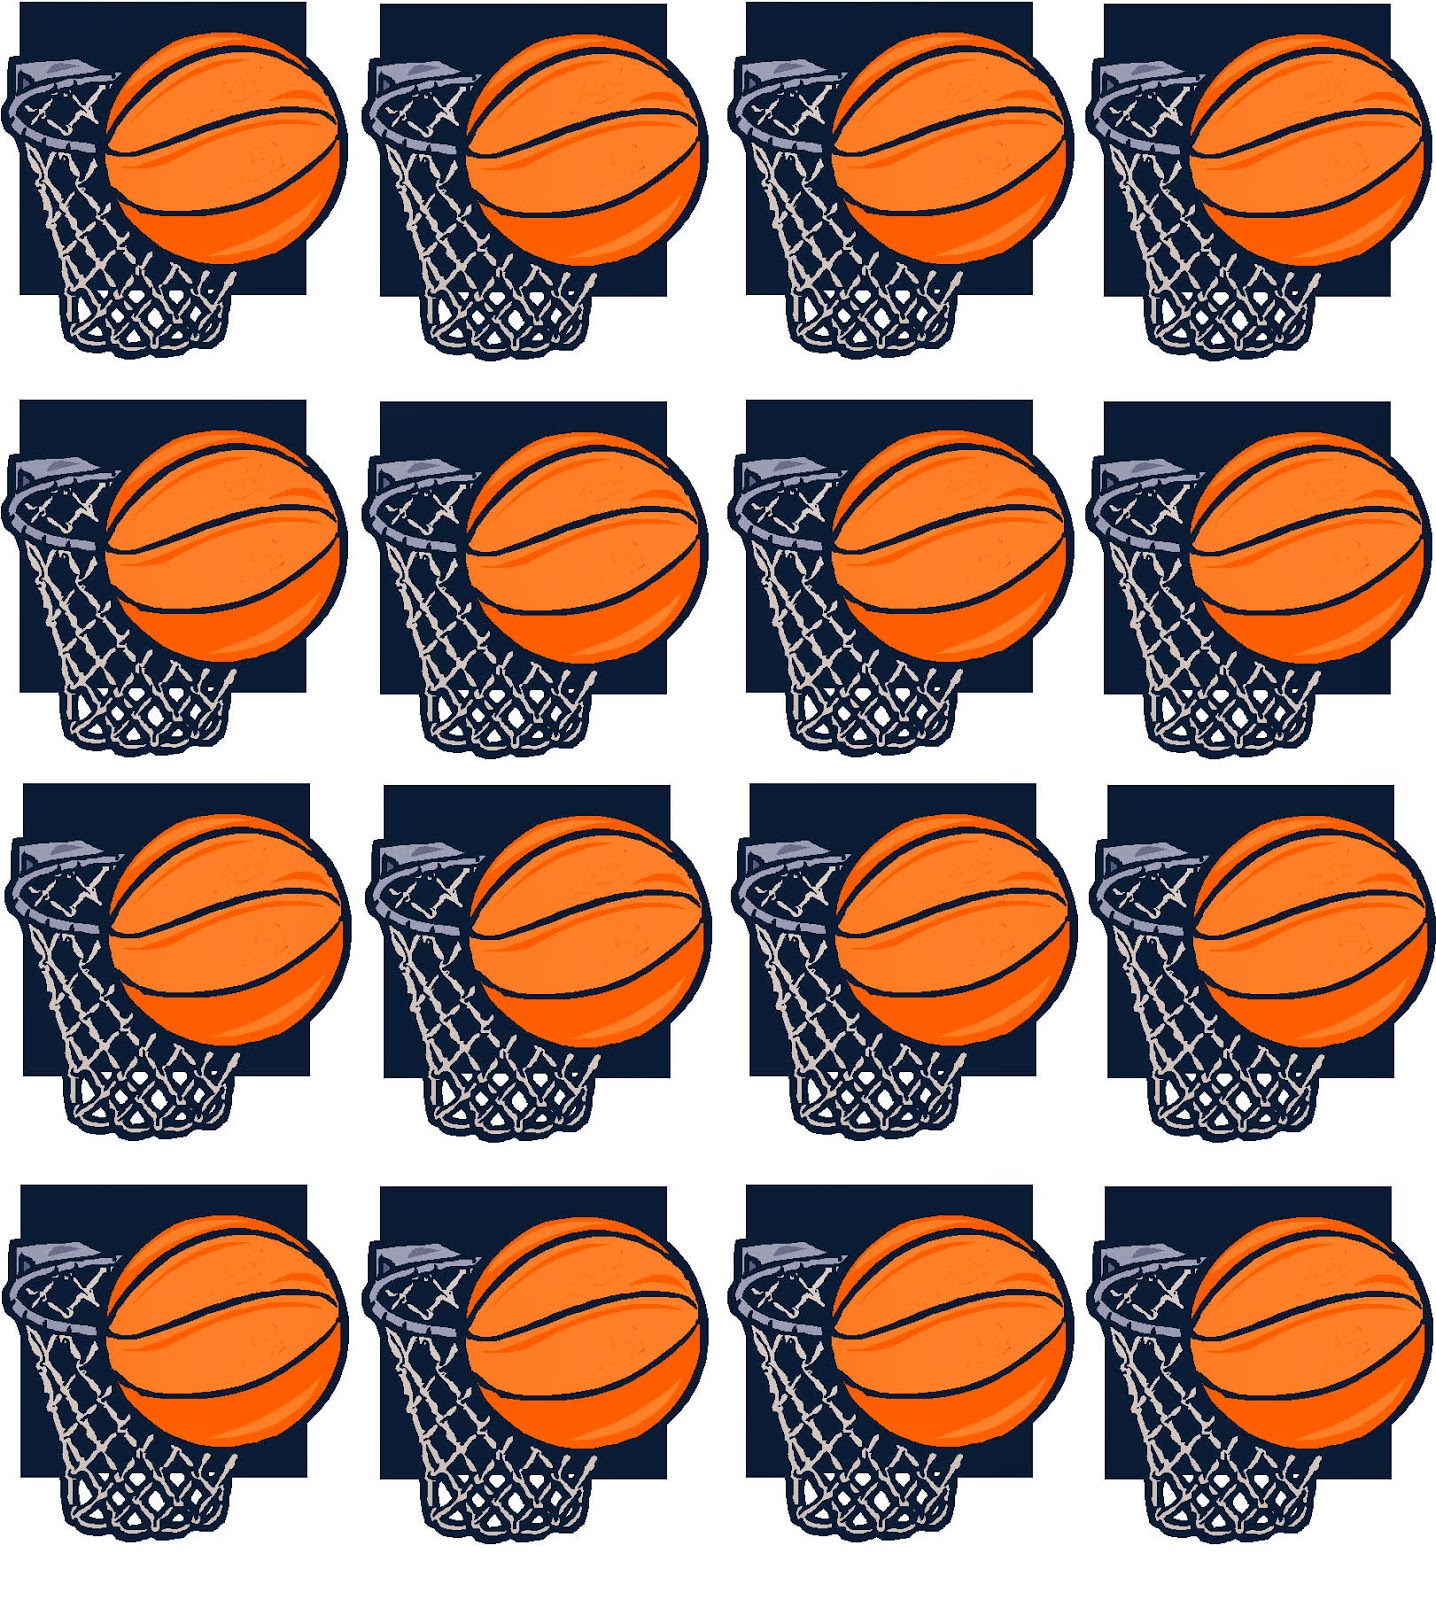 4 Best Images of Basketball Paper Printable Free Printable Basketball